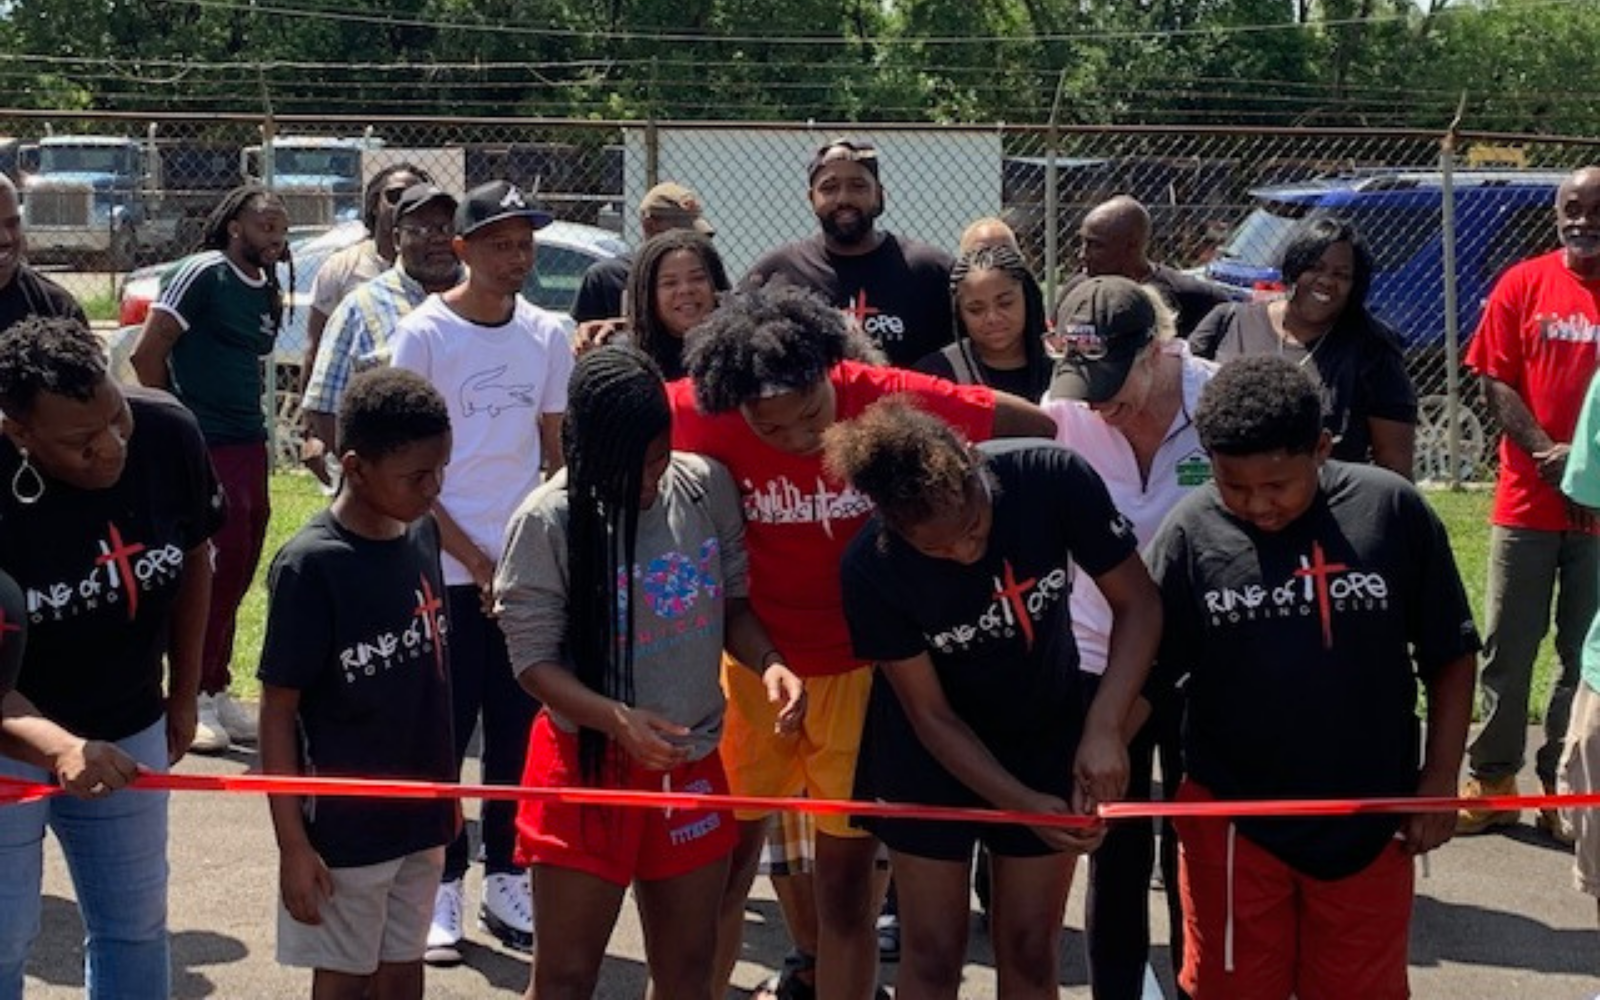 Group of Black children cutting a red ribbon with community members behind